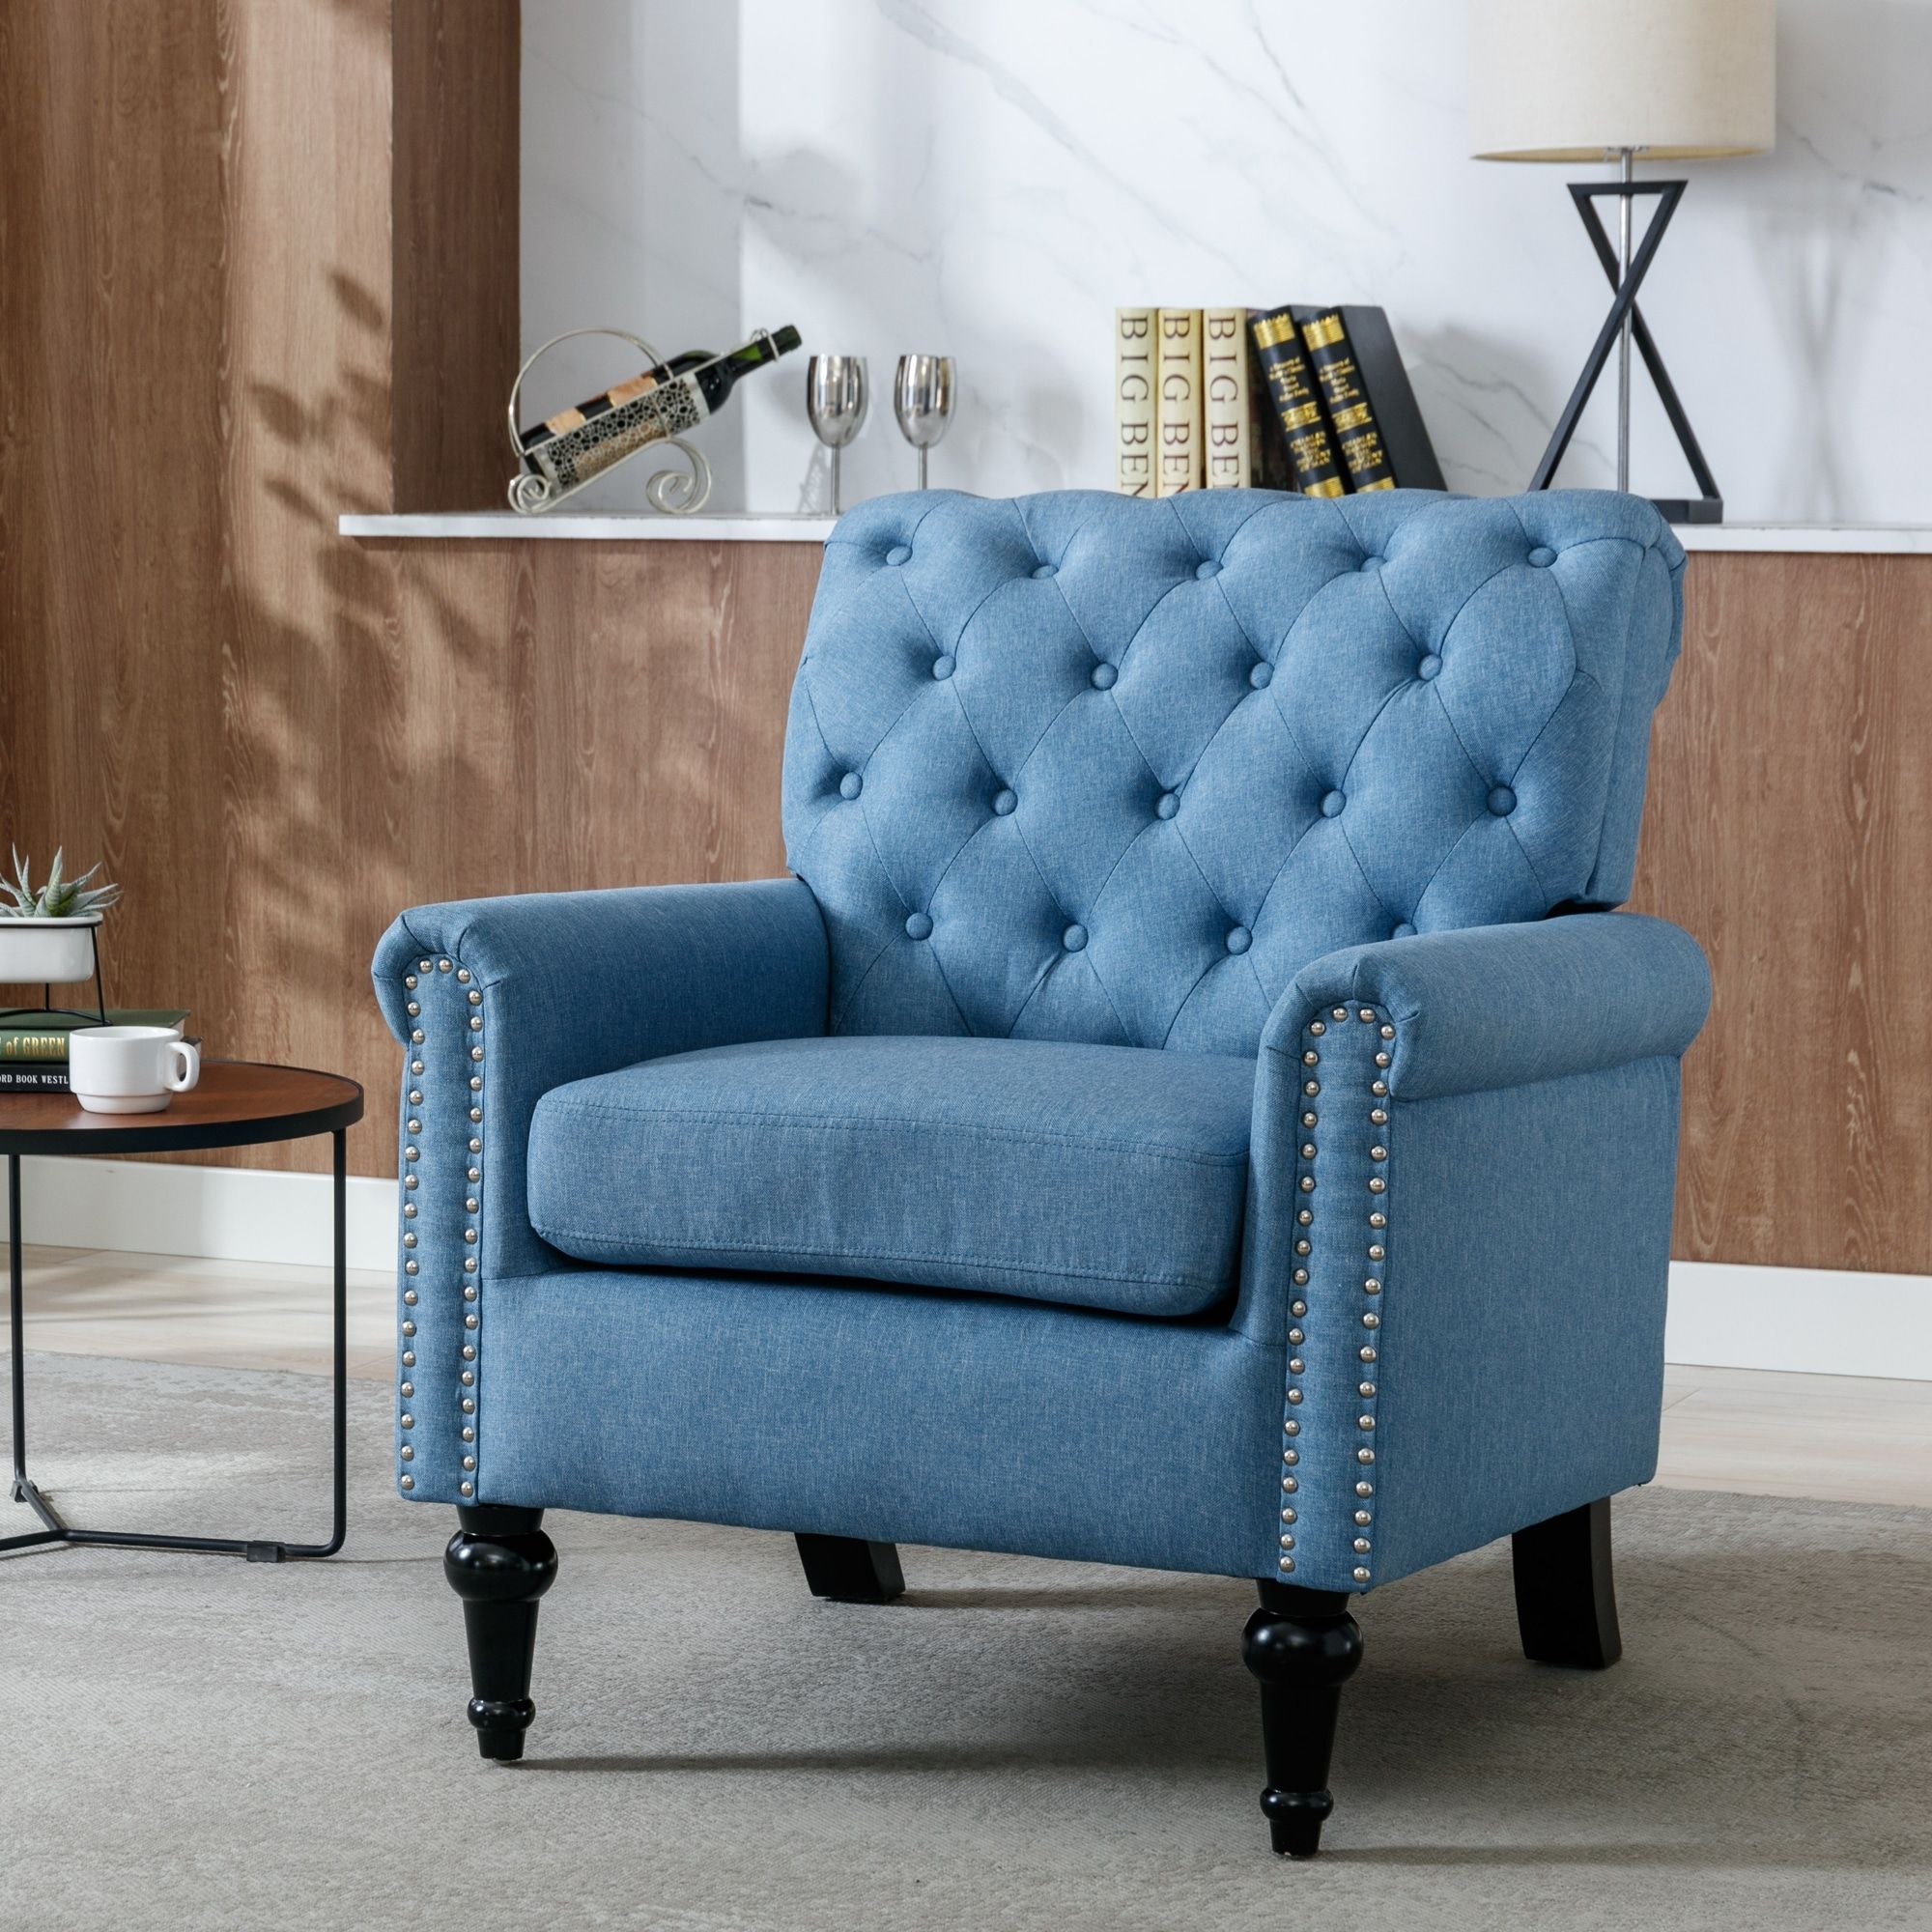 Tufted Upholstered Accent Chairs Single Sofa Chair For Livingroom With  Linen Fabric Armchairs Comfy Reading Chair – Bed Bath & Beyond – 38047189 Intended For Comfy Reading Armchairs (Photo 6 of 15)